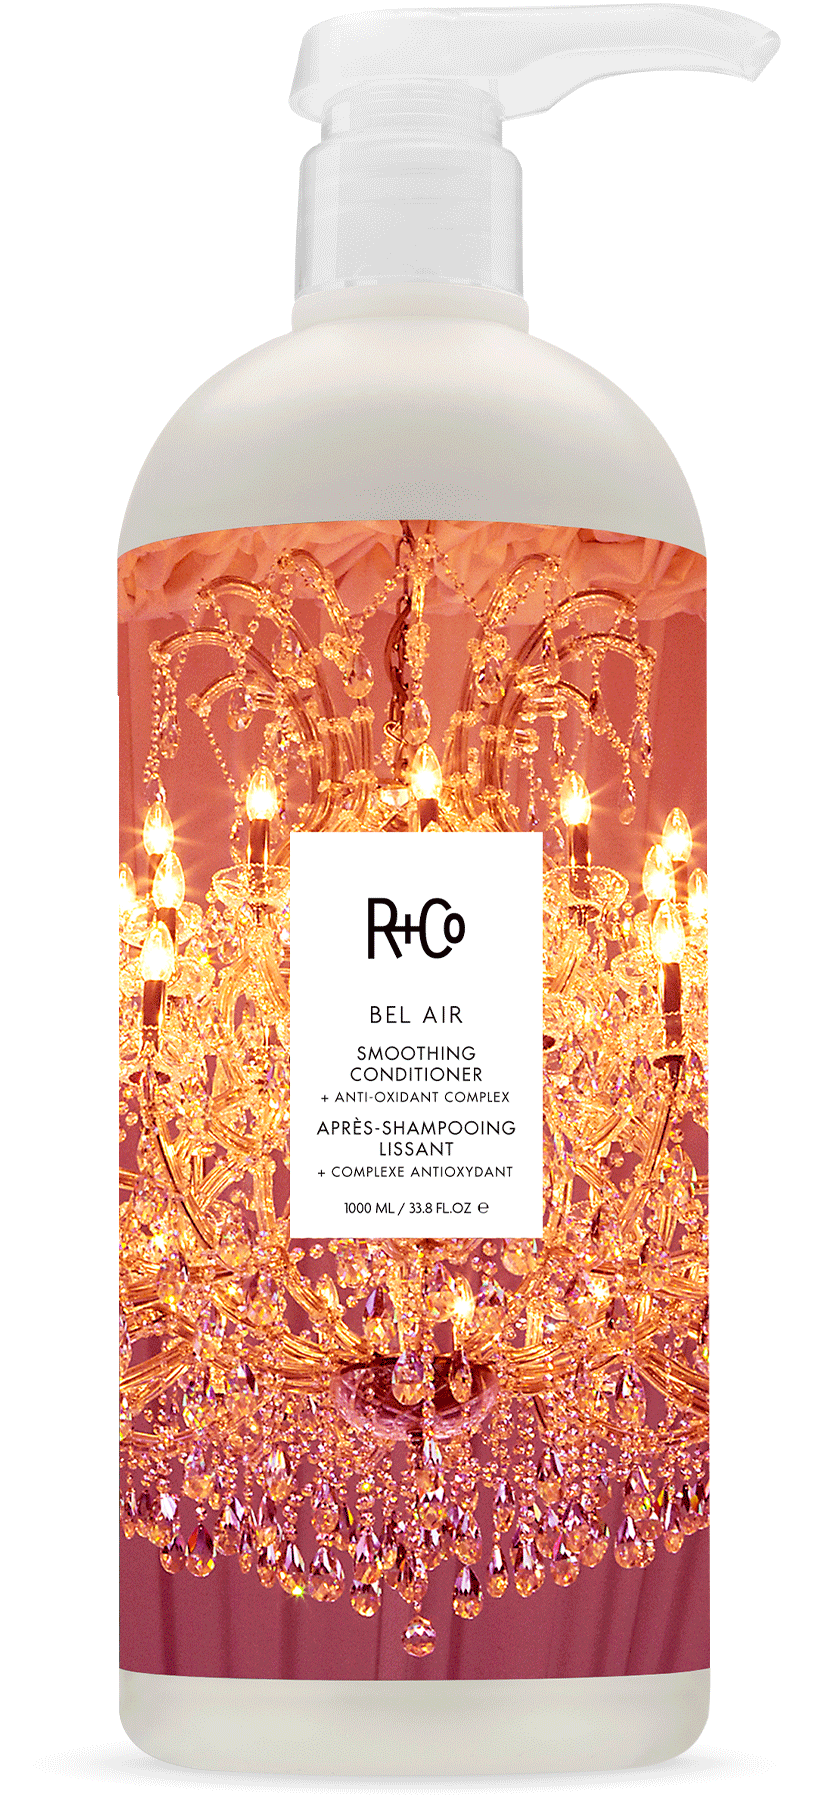 R+CO - Bel Air - Smoothing Conditioner + Anti-Oxidant Complex